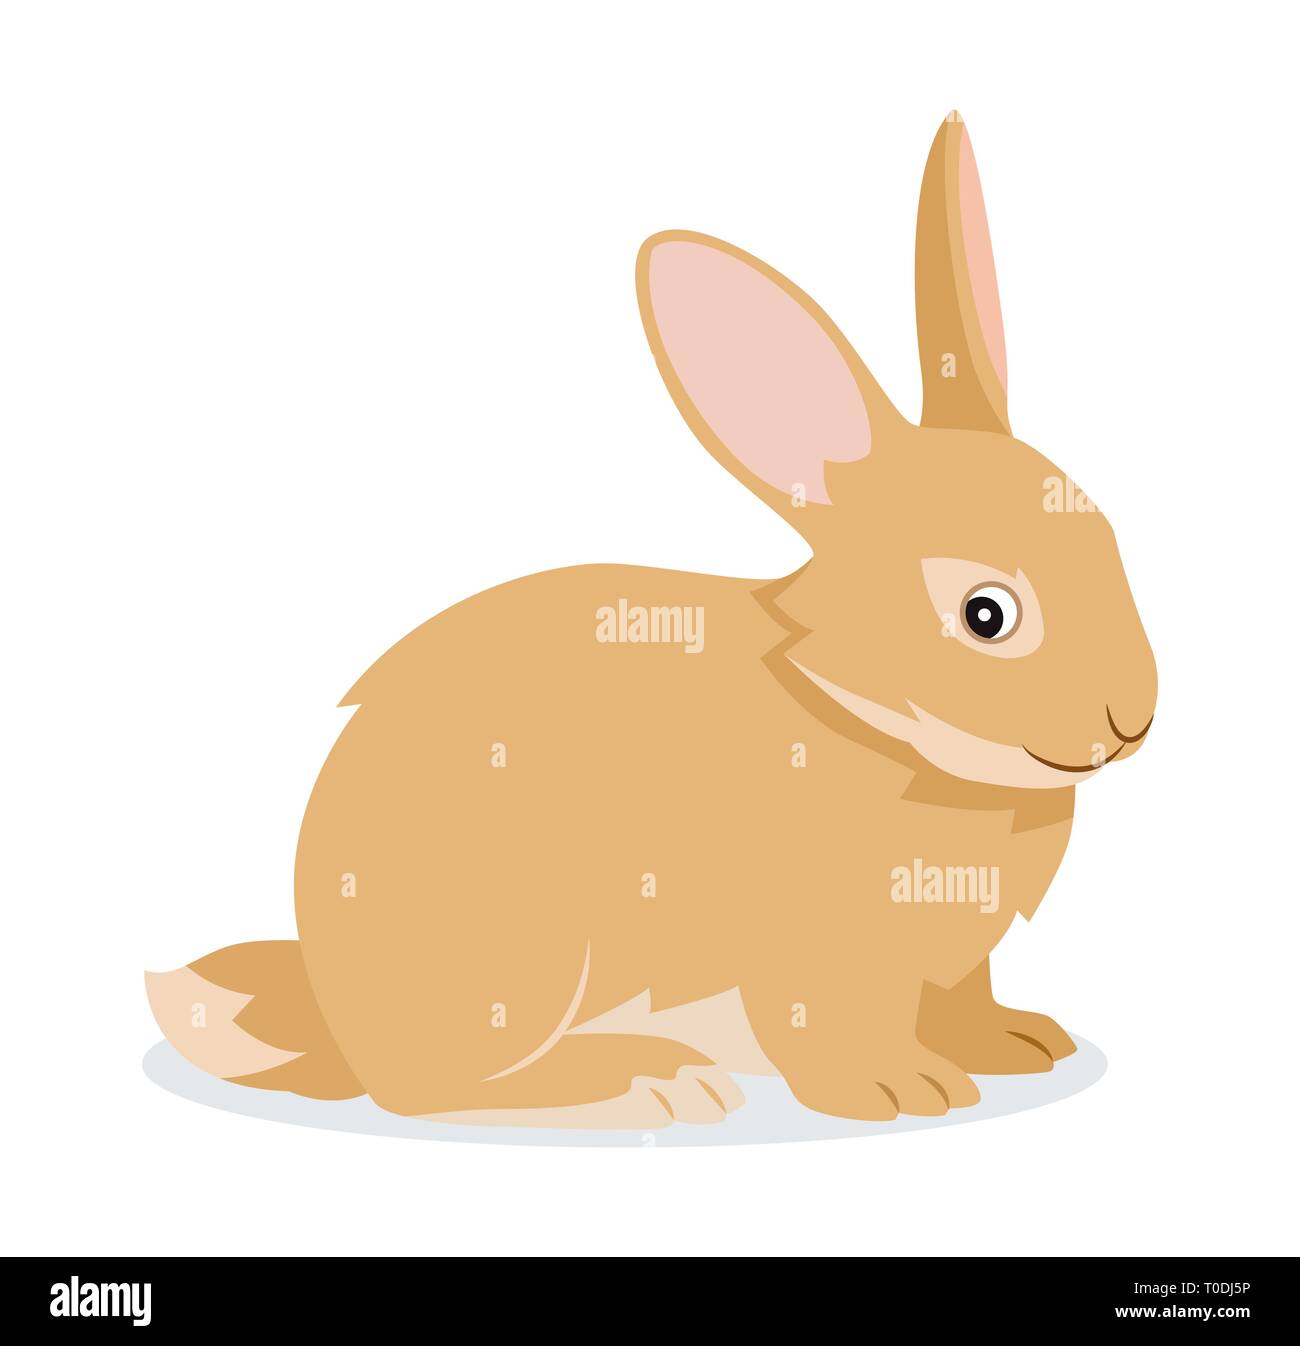 Cute rabbit icon isolated, small fluffy pet with long ears, domestic animal, vector illustration Stock Vector